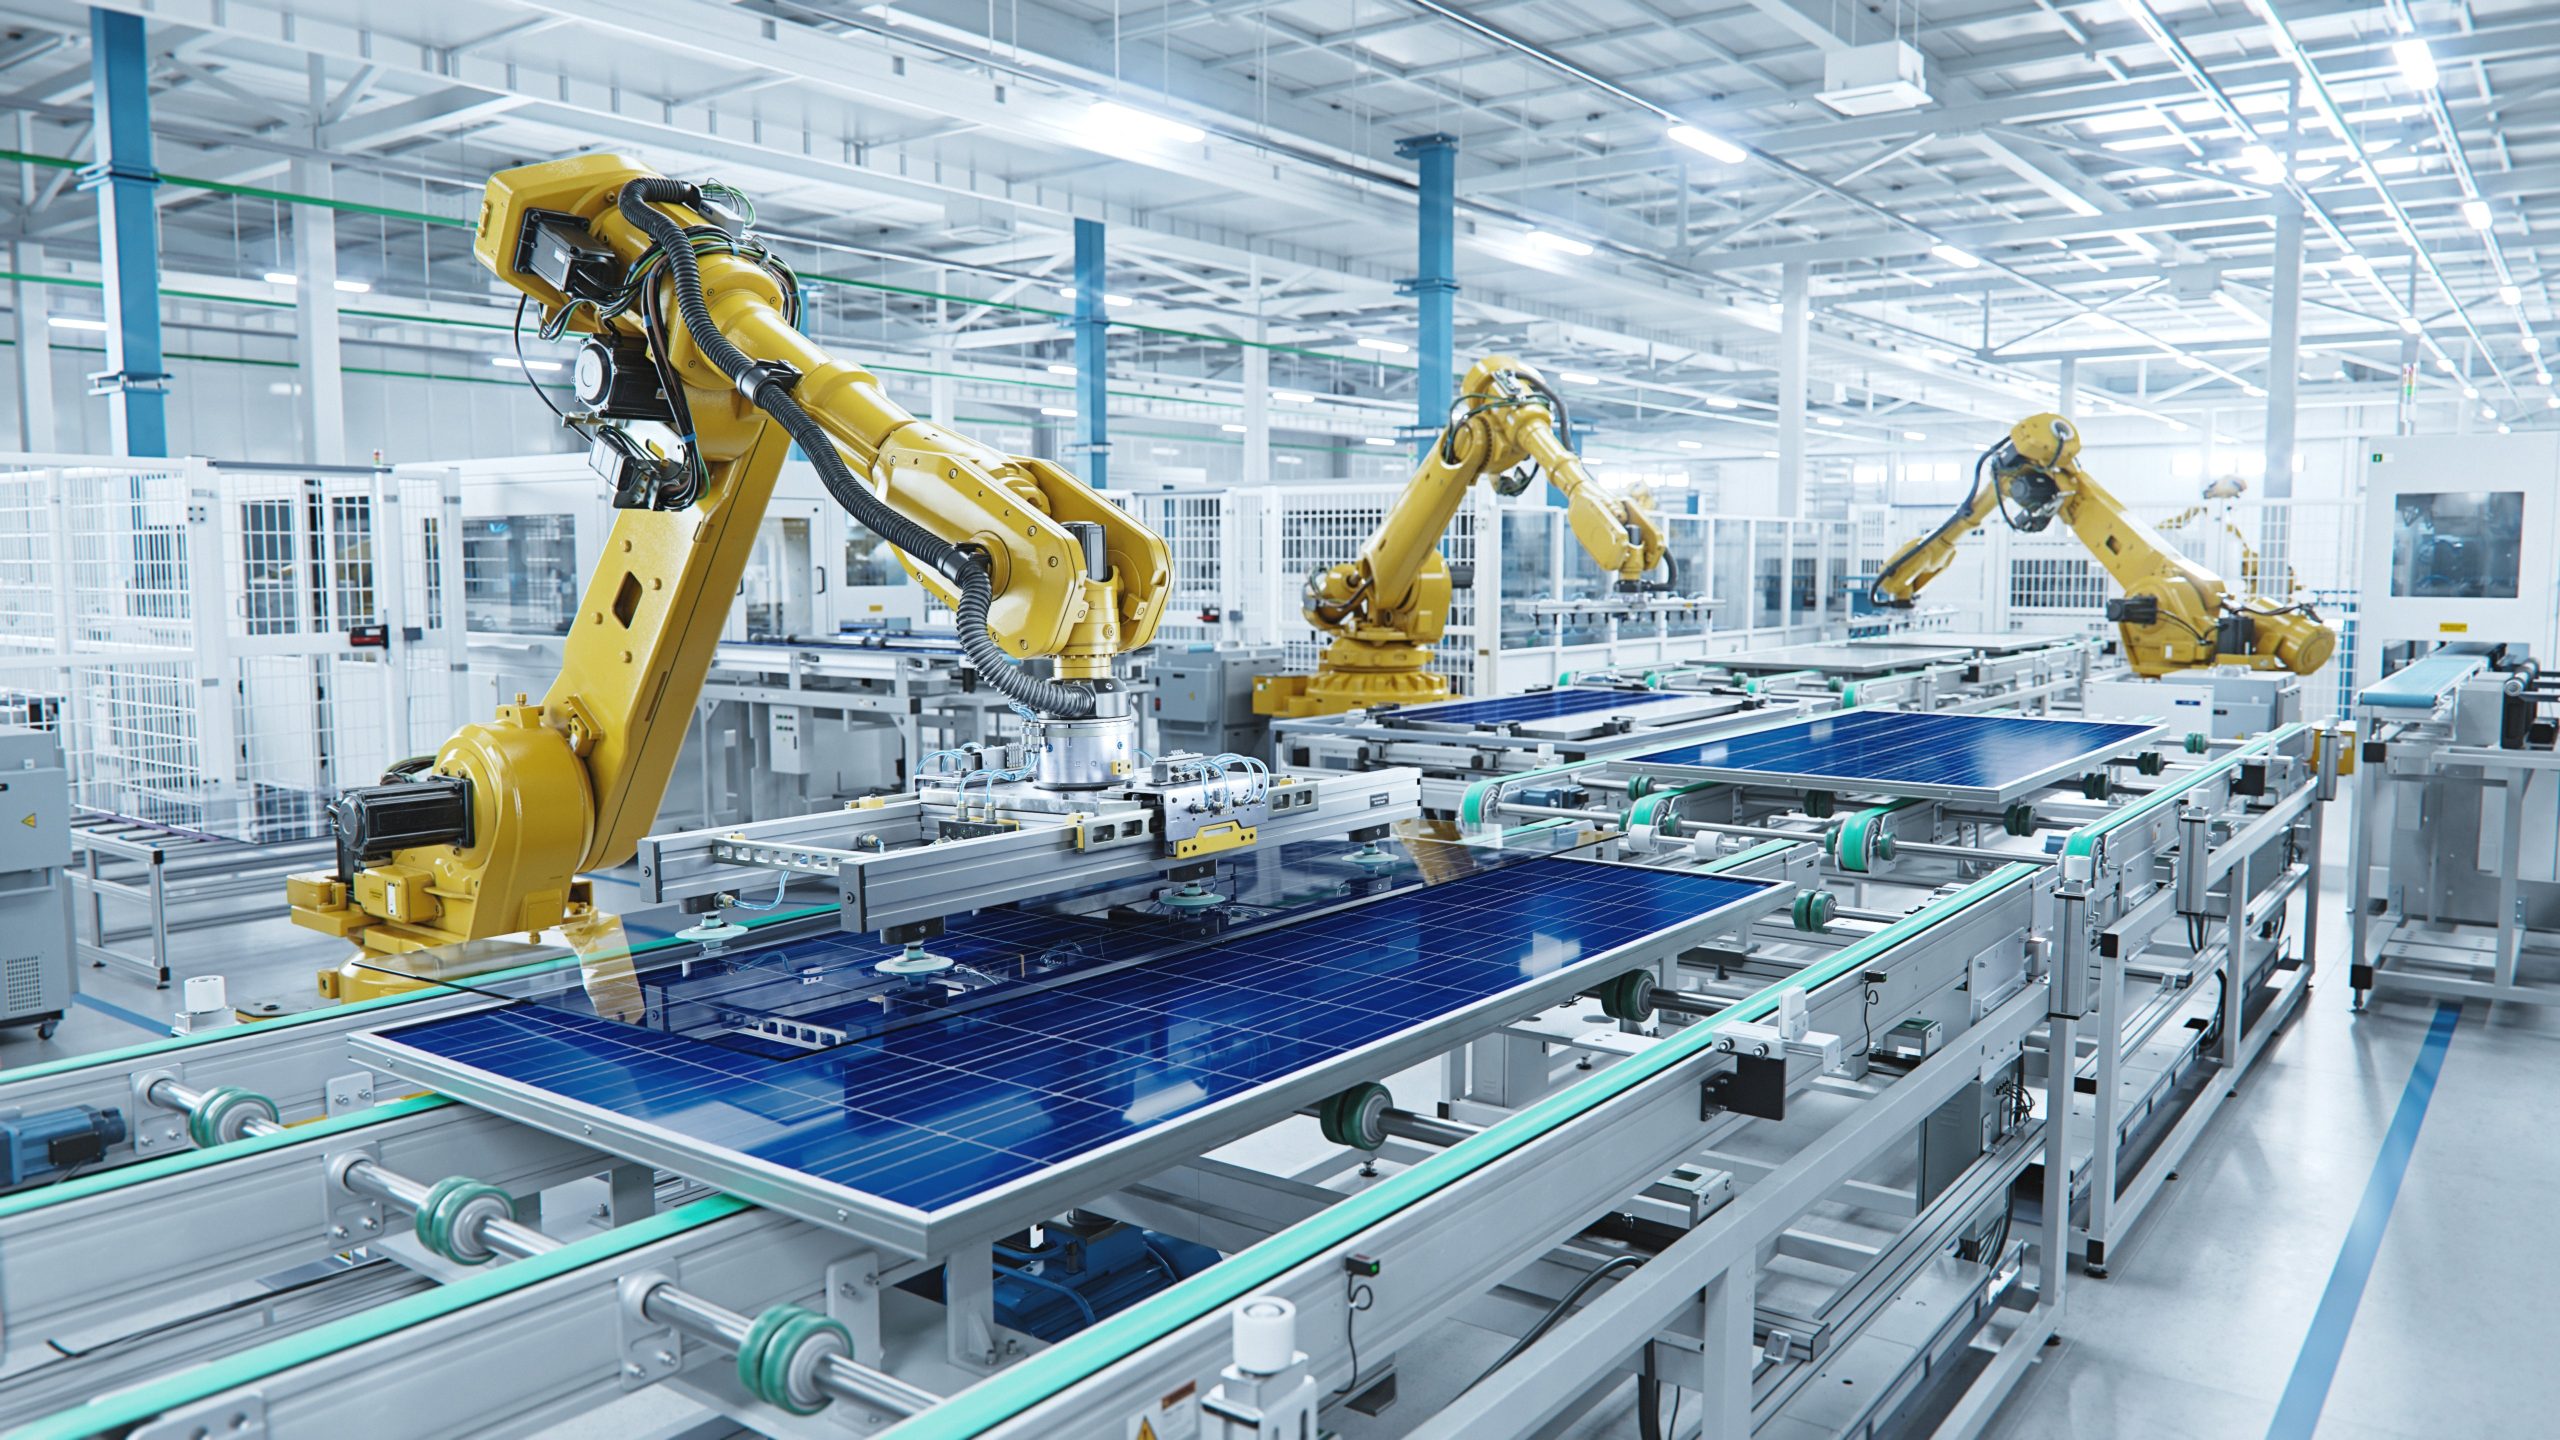 Large Production Line with Industrial Robot Arms at Automated Manufacturing Facility